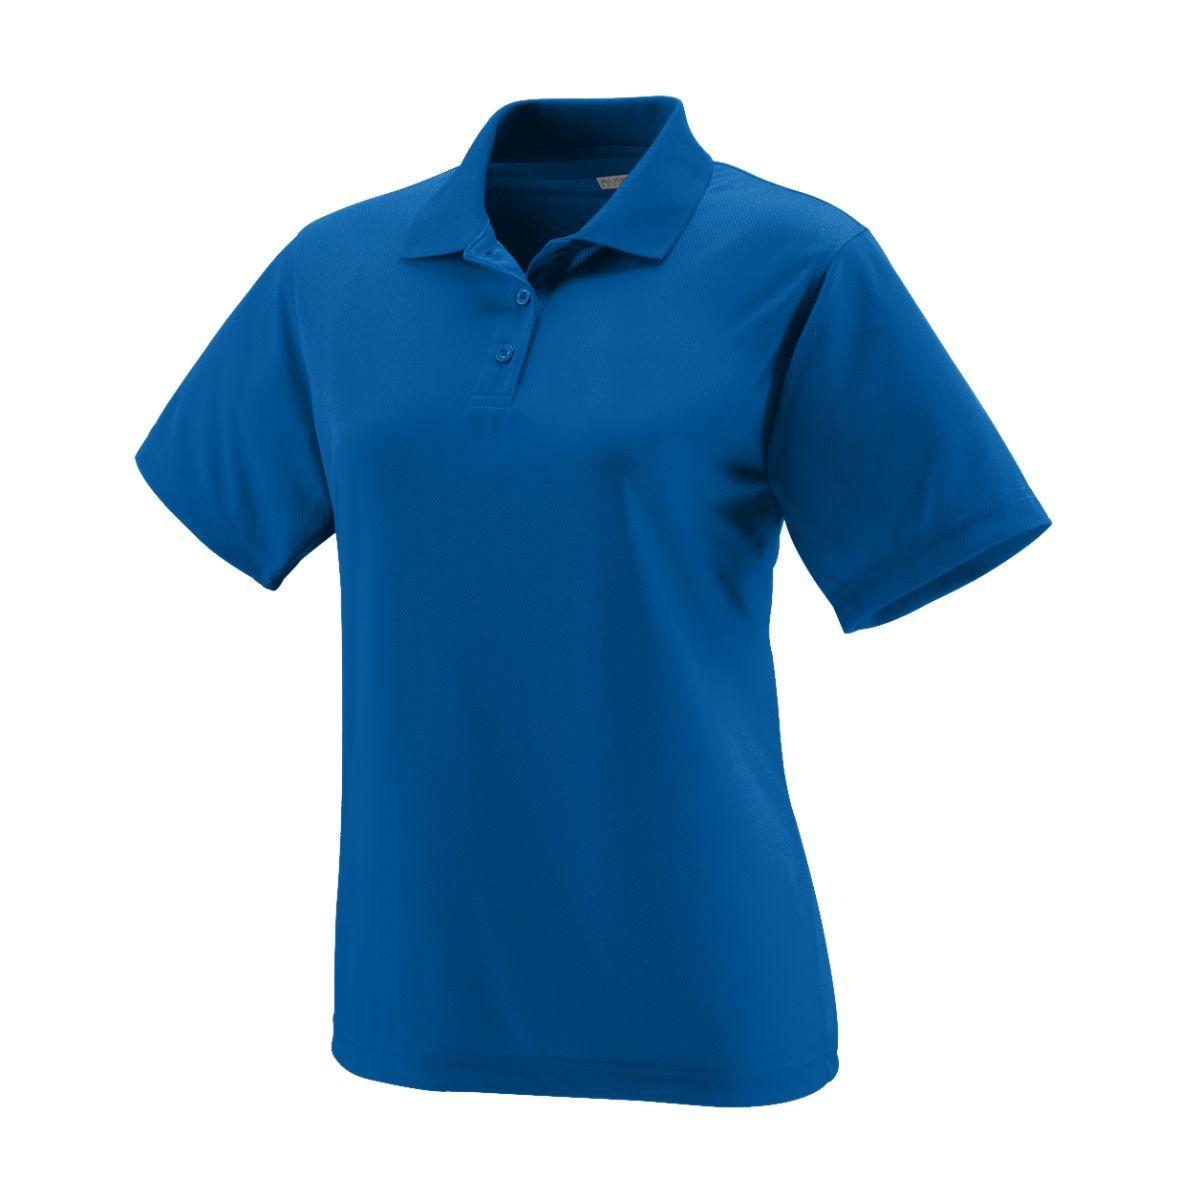 Augusta Sportswear Ladies Wicking Mesh Polo in Royal  -Part of the Ladies, Ladies-Polo, Polos, Augusta-Products, Tennis, Shirts product lines at KanaleyCreations.com